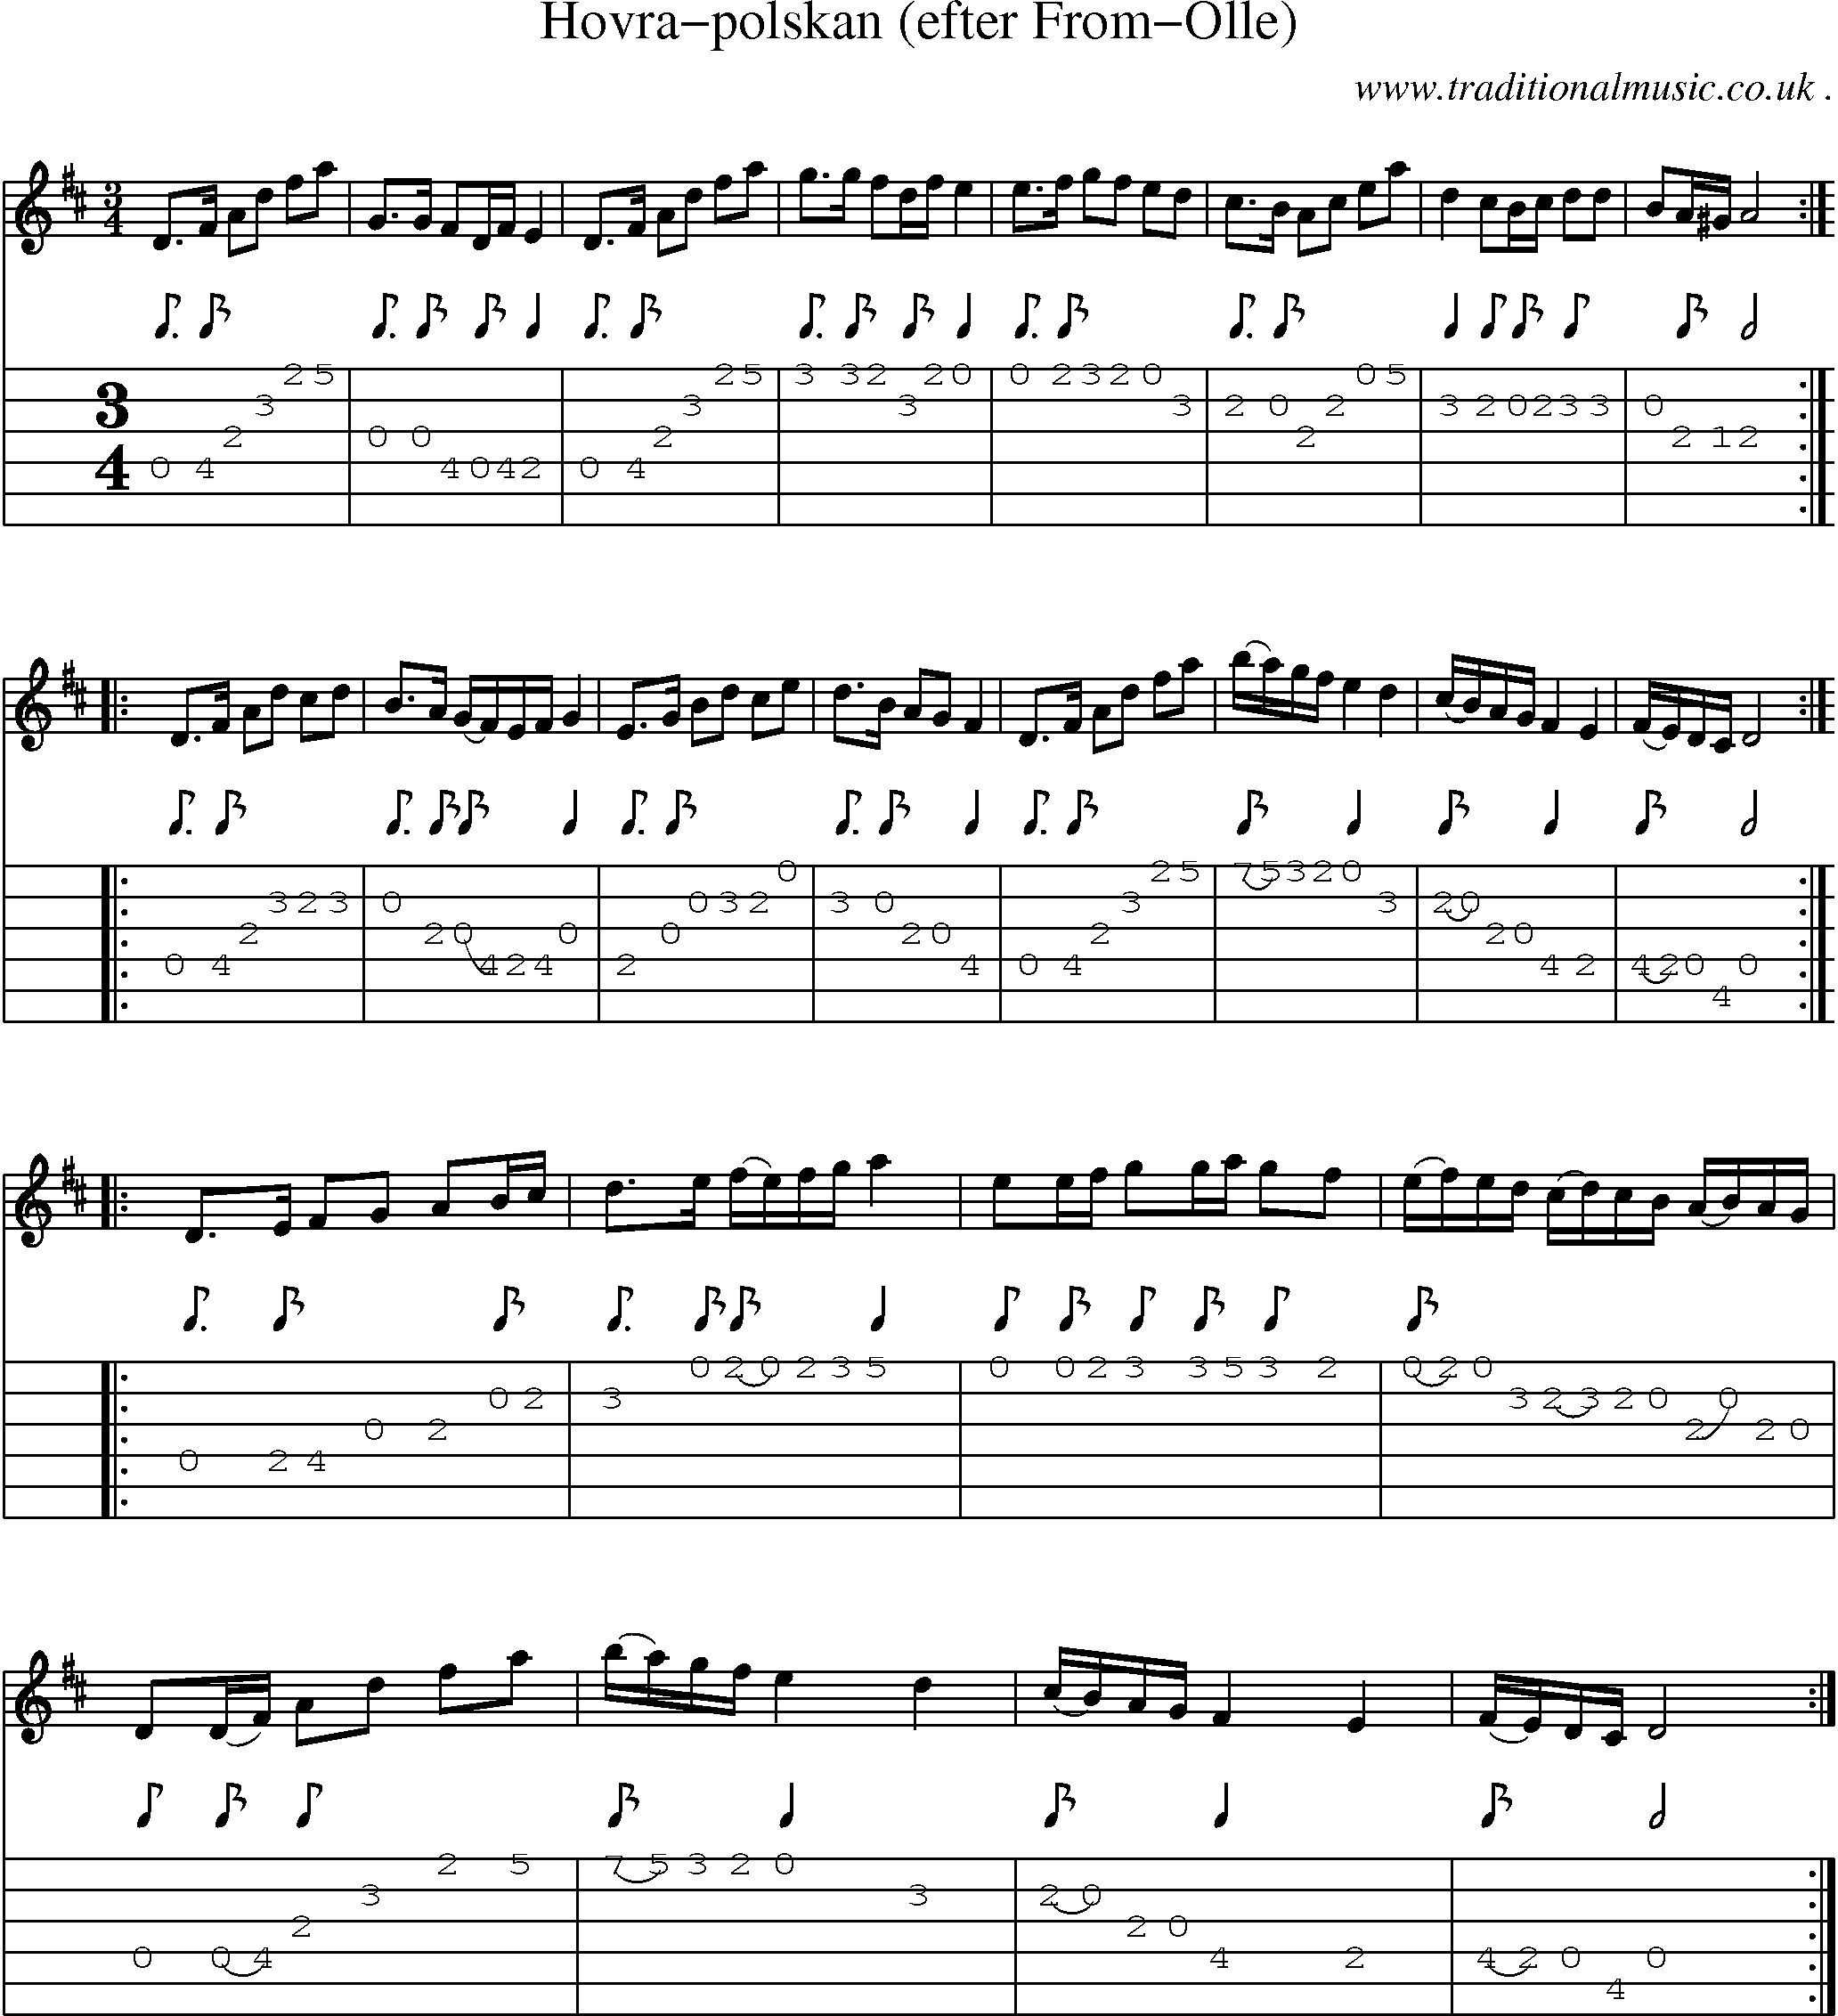 Sheet-Music and Guitar Tabs for Hovra-polskan (efter From-olle)